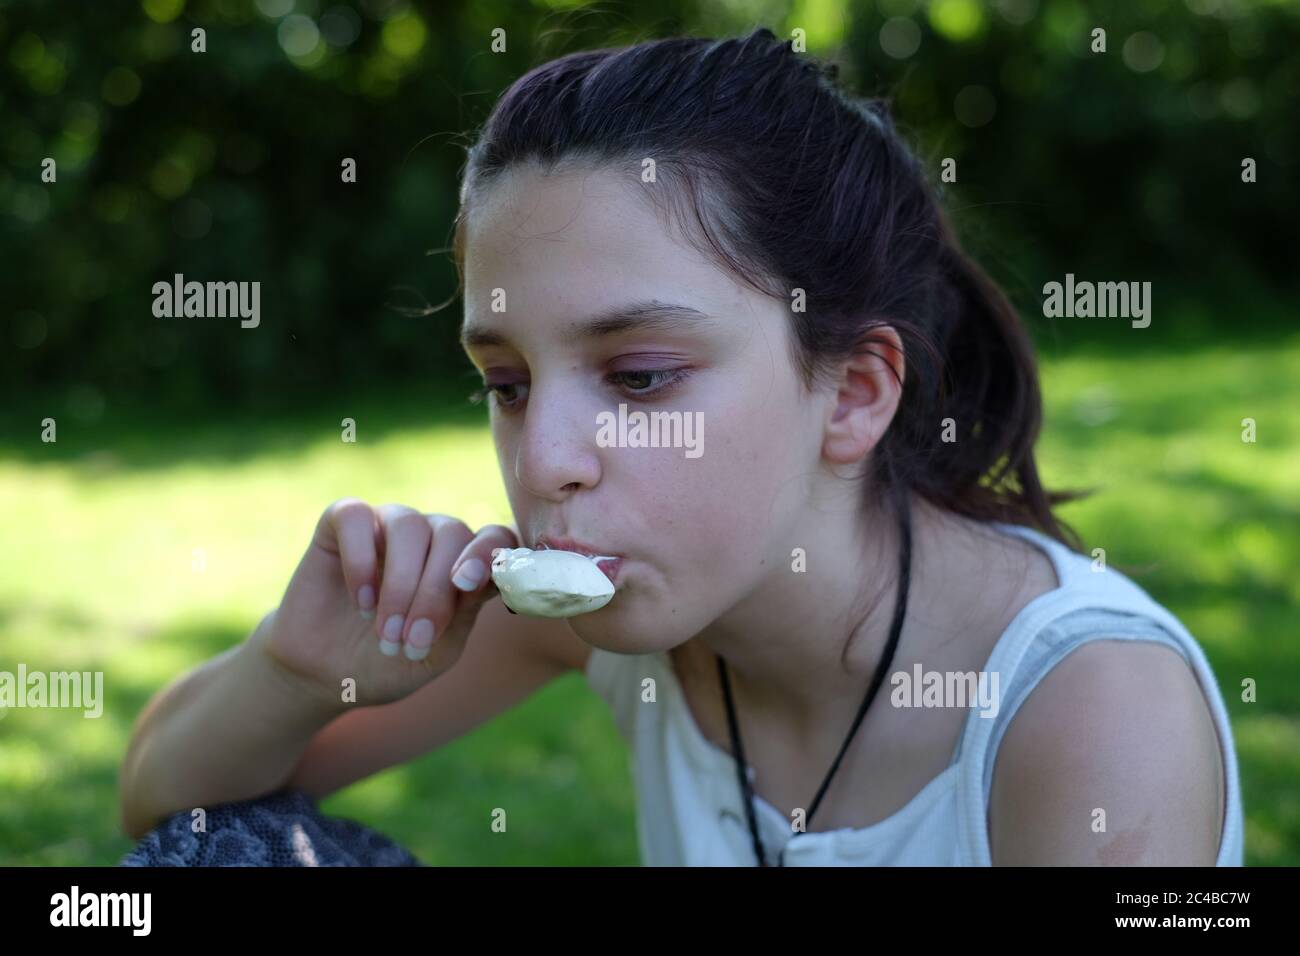 Young teen girl eating an ice cream in the park. Stock Photo